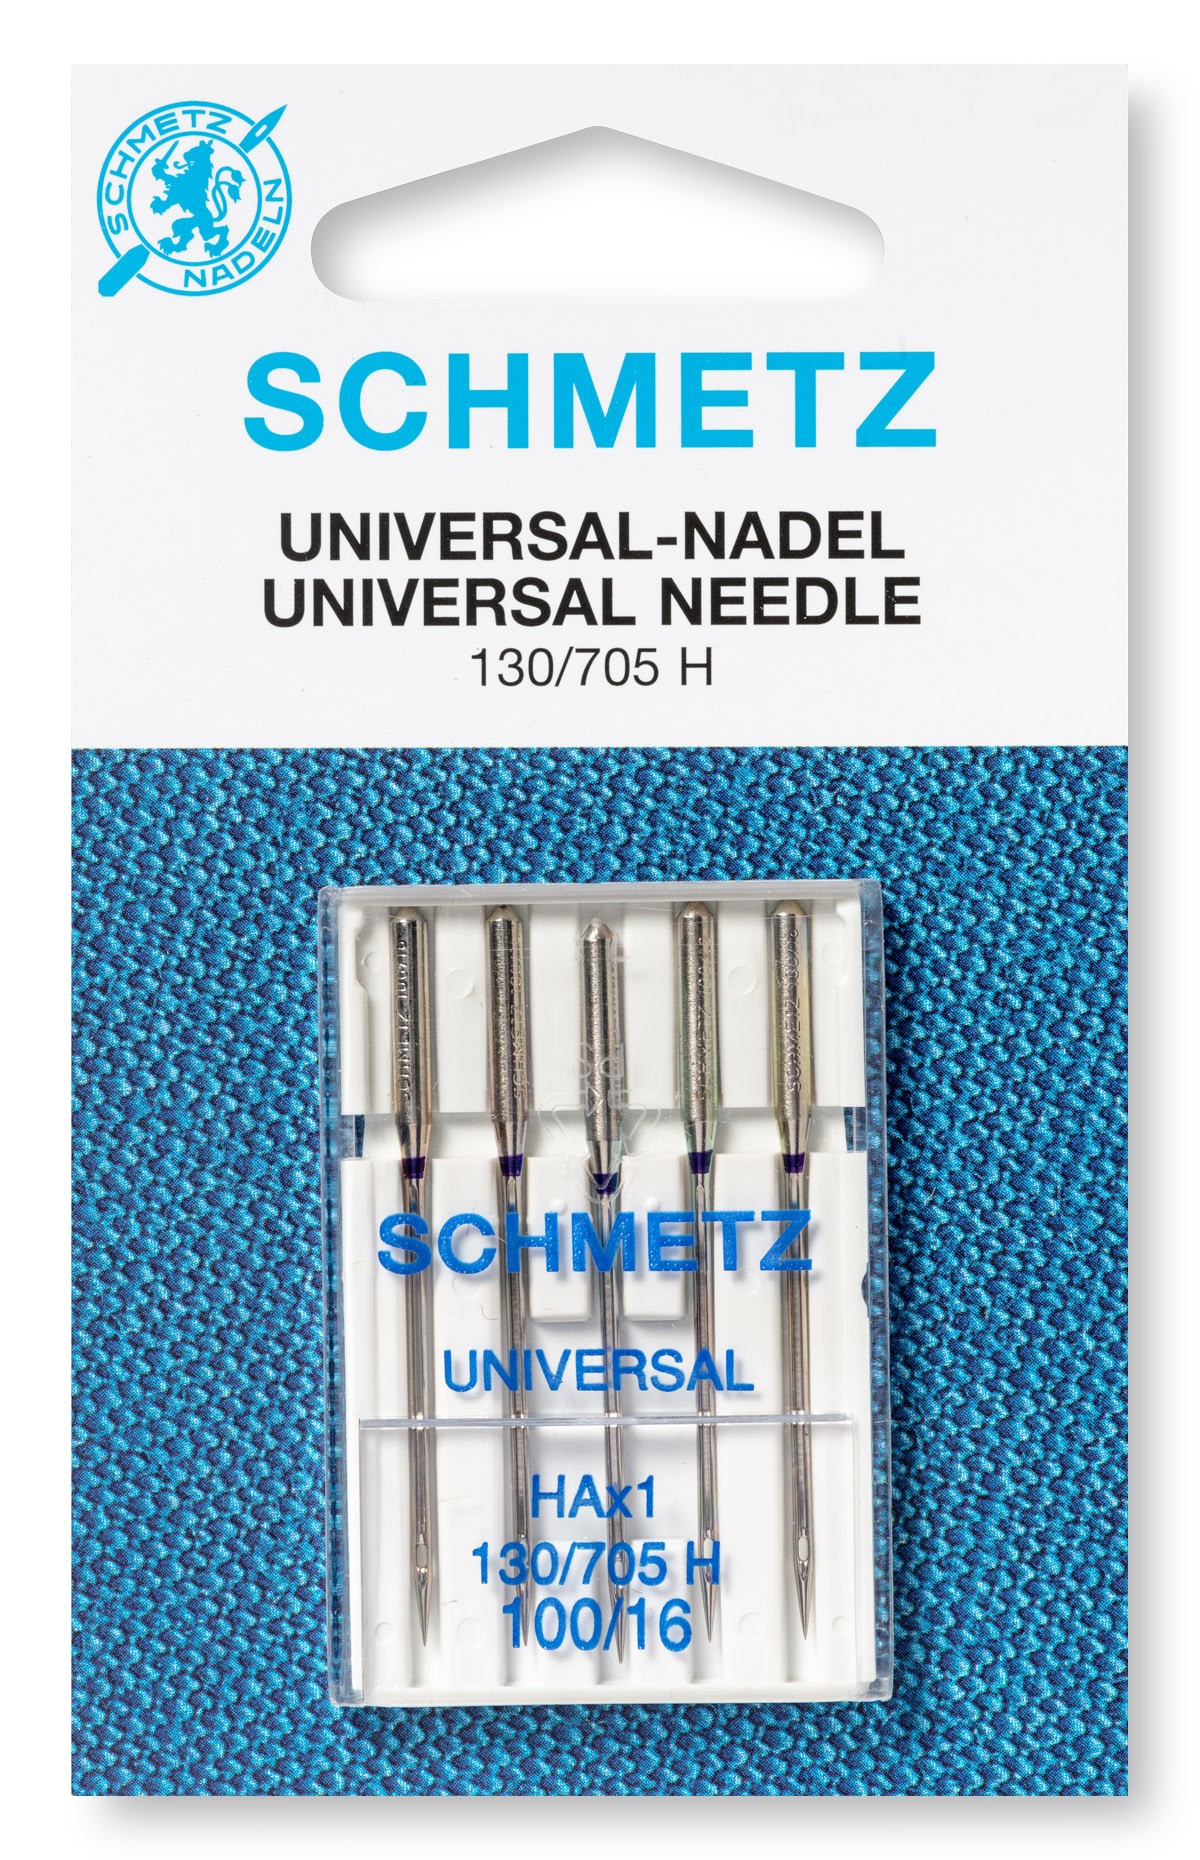 Leather Ball point Quilting Top Stitch Embroidery Sewing Machine Needle by Schmetz Germany 30 different Packets and sizes including Metalic Twin & Schmetz ABC correct Needle Guidel 705h multi pack x30 Denim Stretch Twin